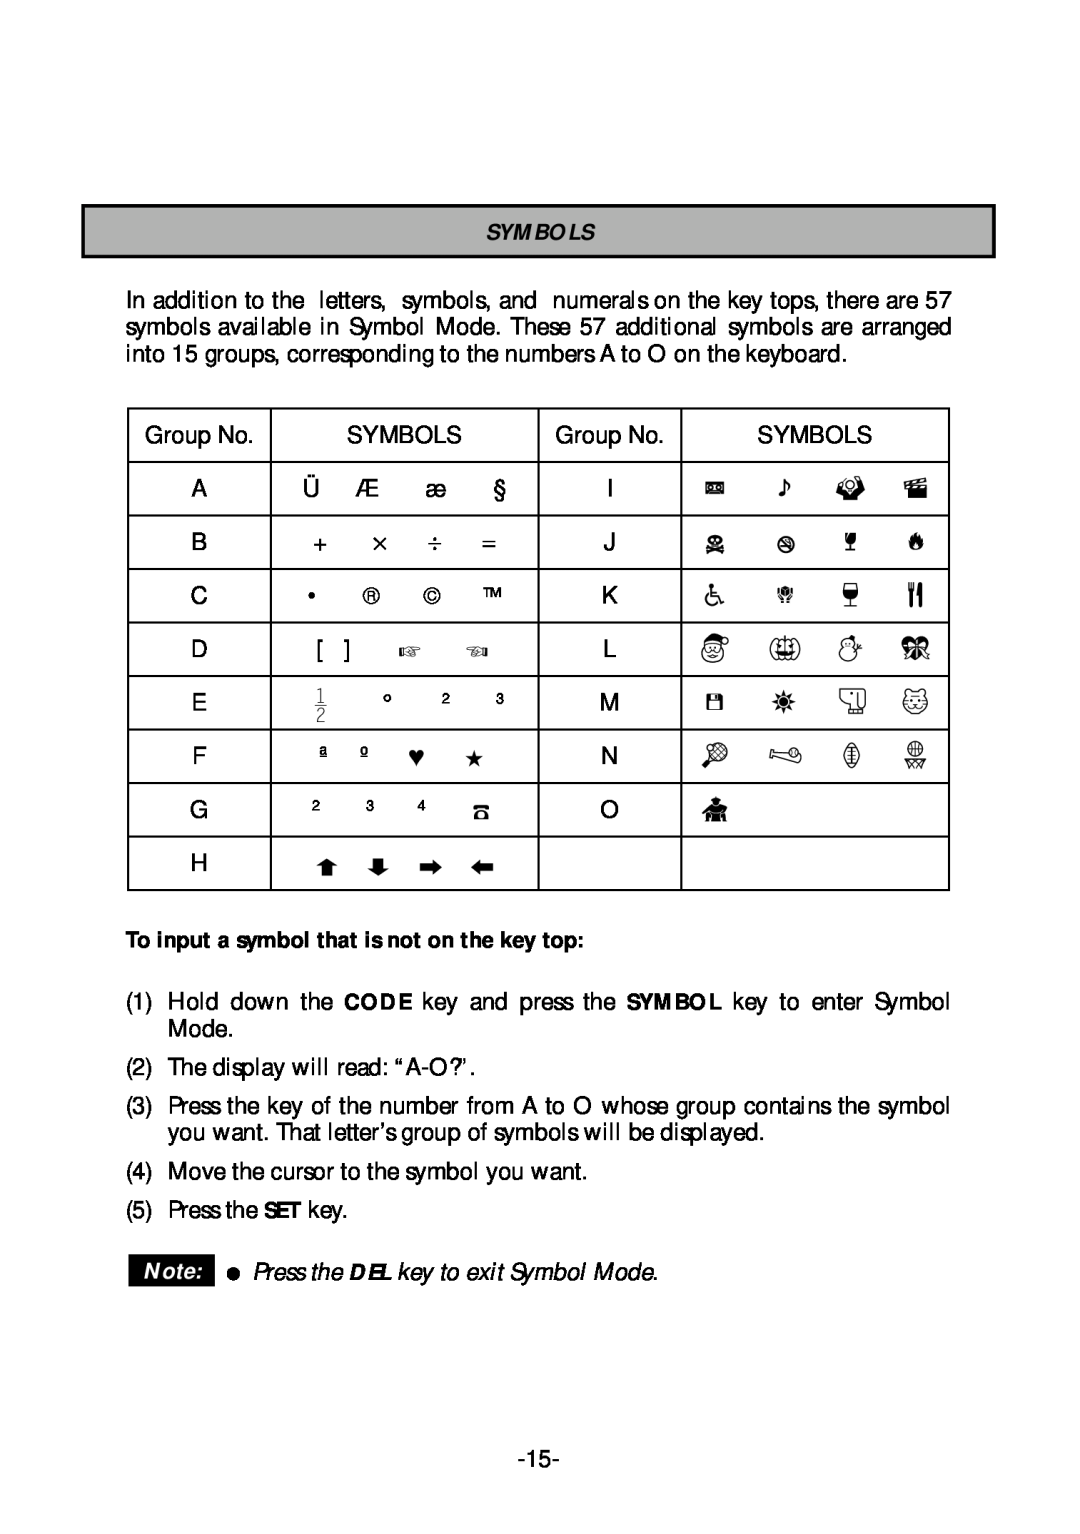 Brother PT-1700 manual Symbols, To input a symbol that is not on the key top 